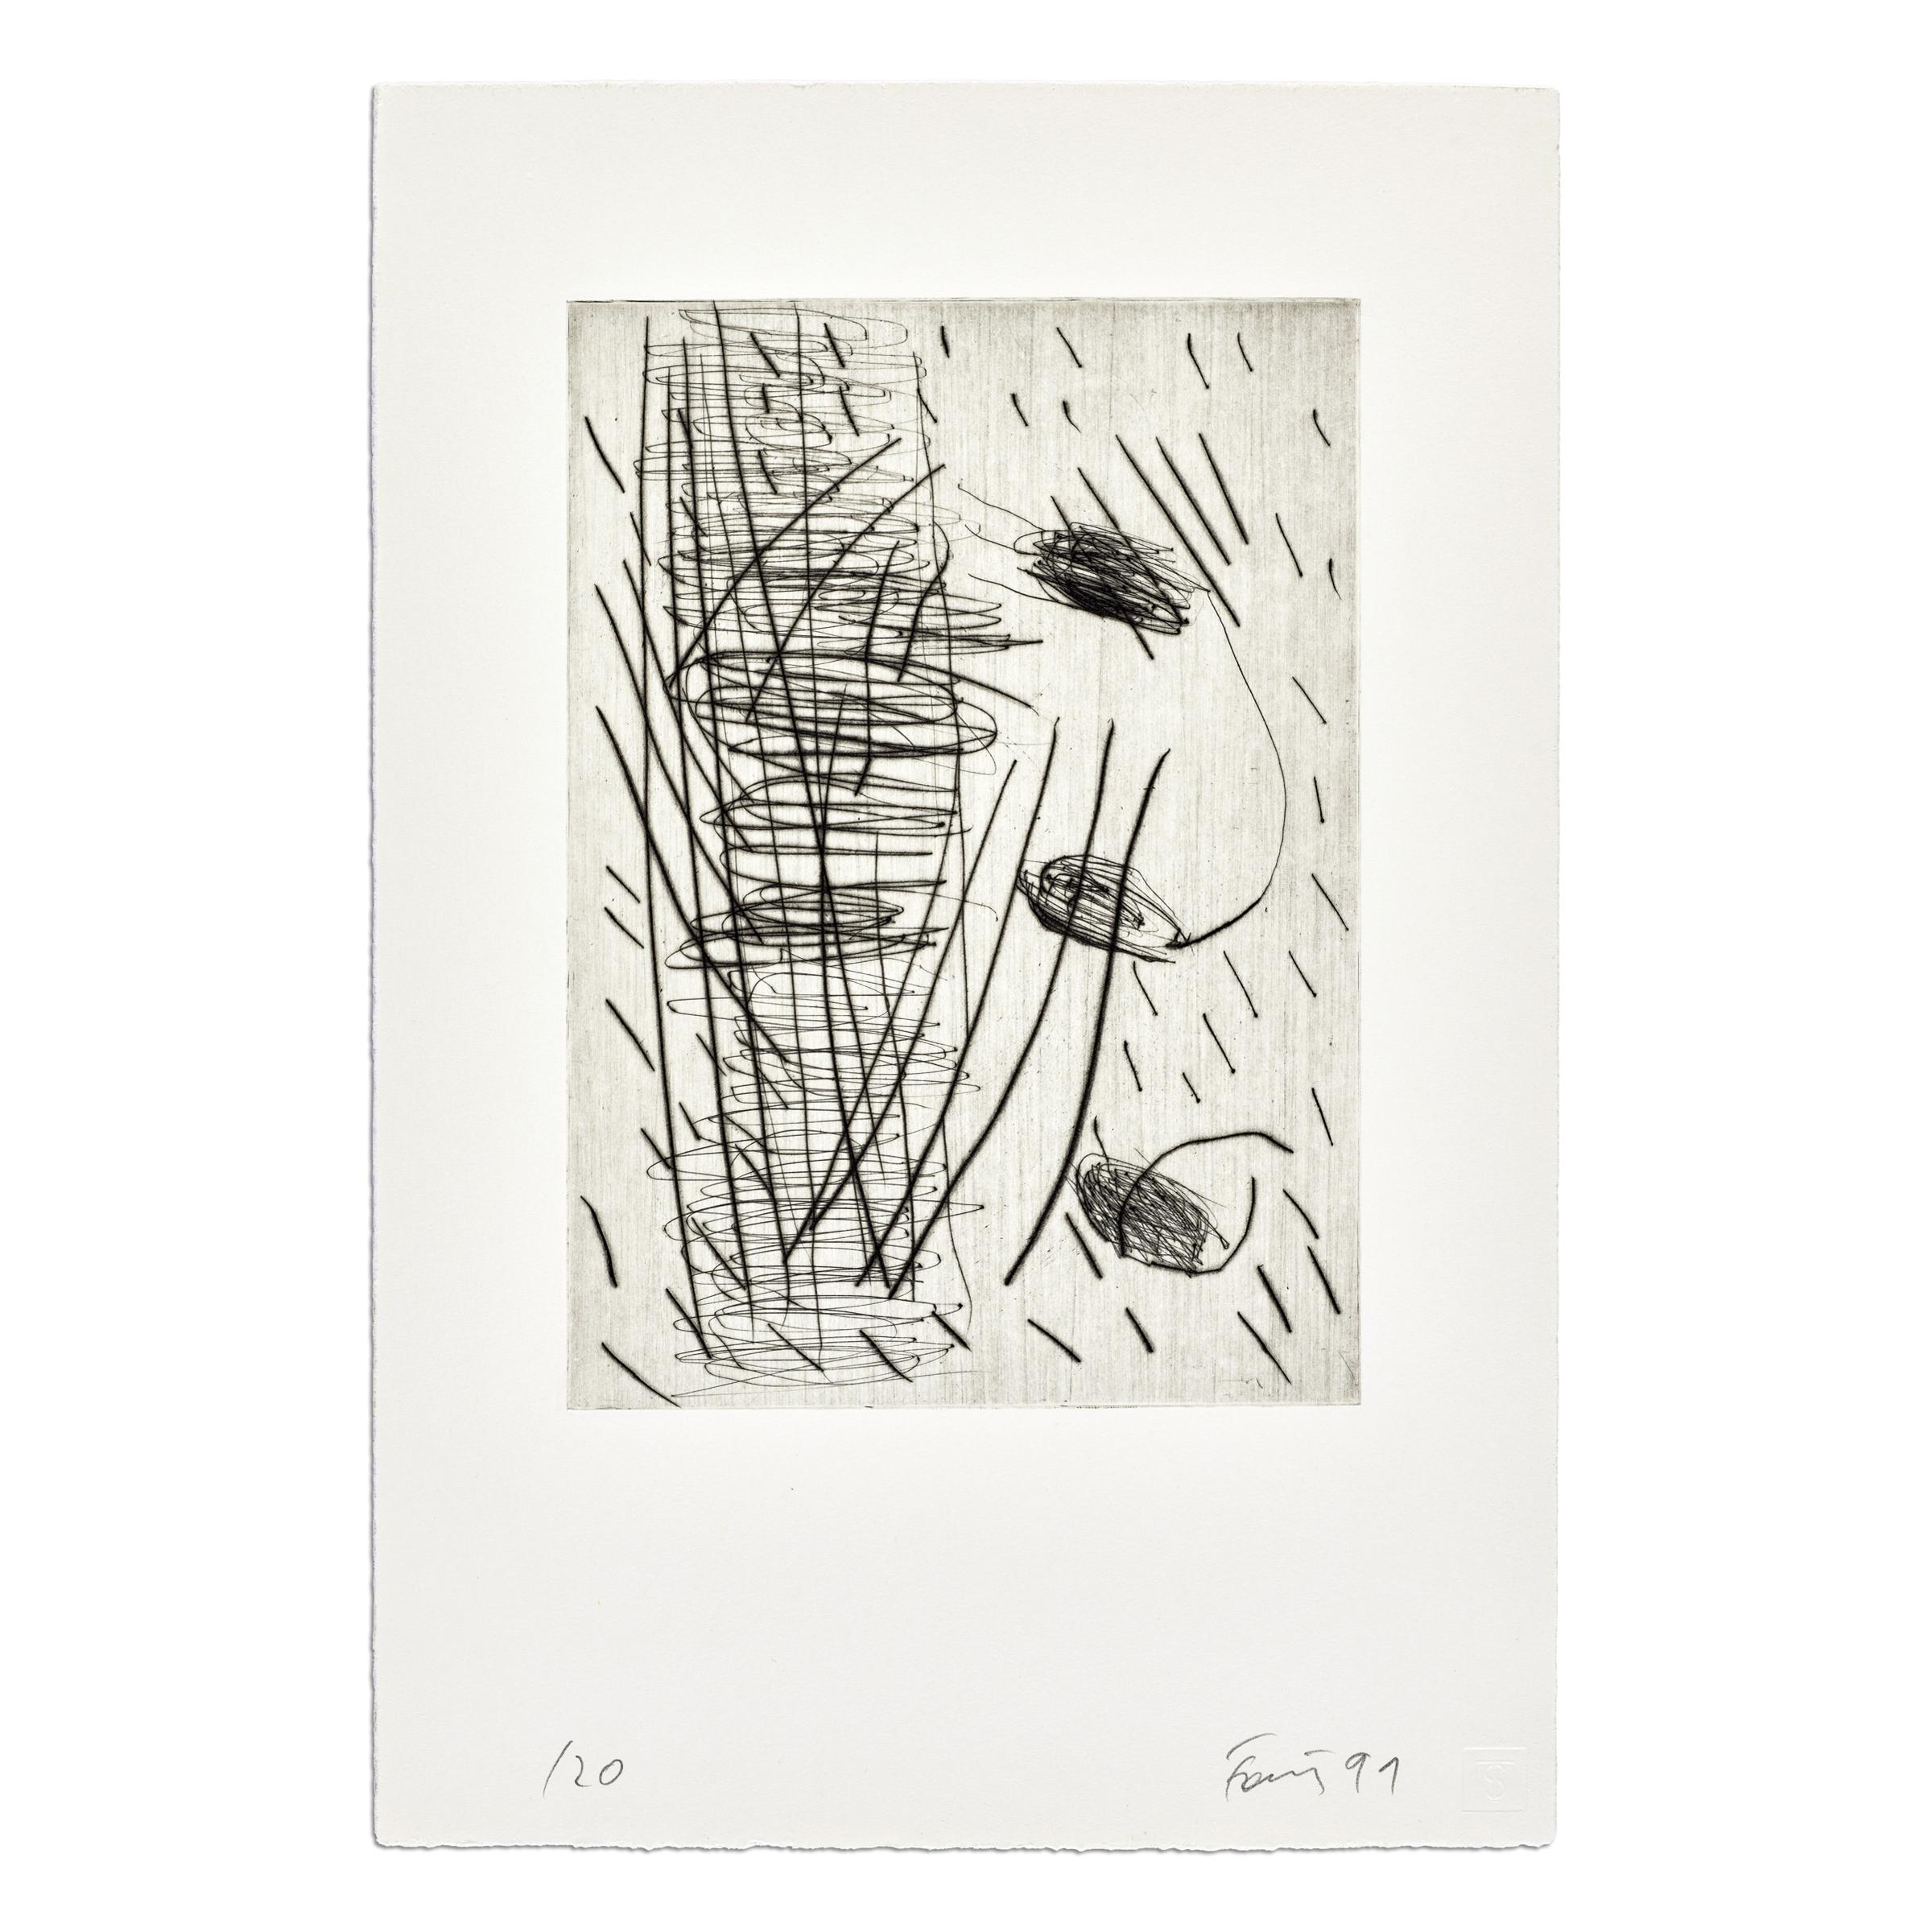 Günther Förg (German, 1952-2013)
6 Radierungen, 1990
Medium: 6 Drypoint etchings on wove paper
Dimensions. each 39.5 x 26.5 cm
Edition of 20 + XIII: Hand-signed and numbered